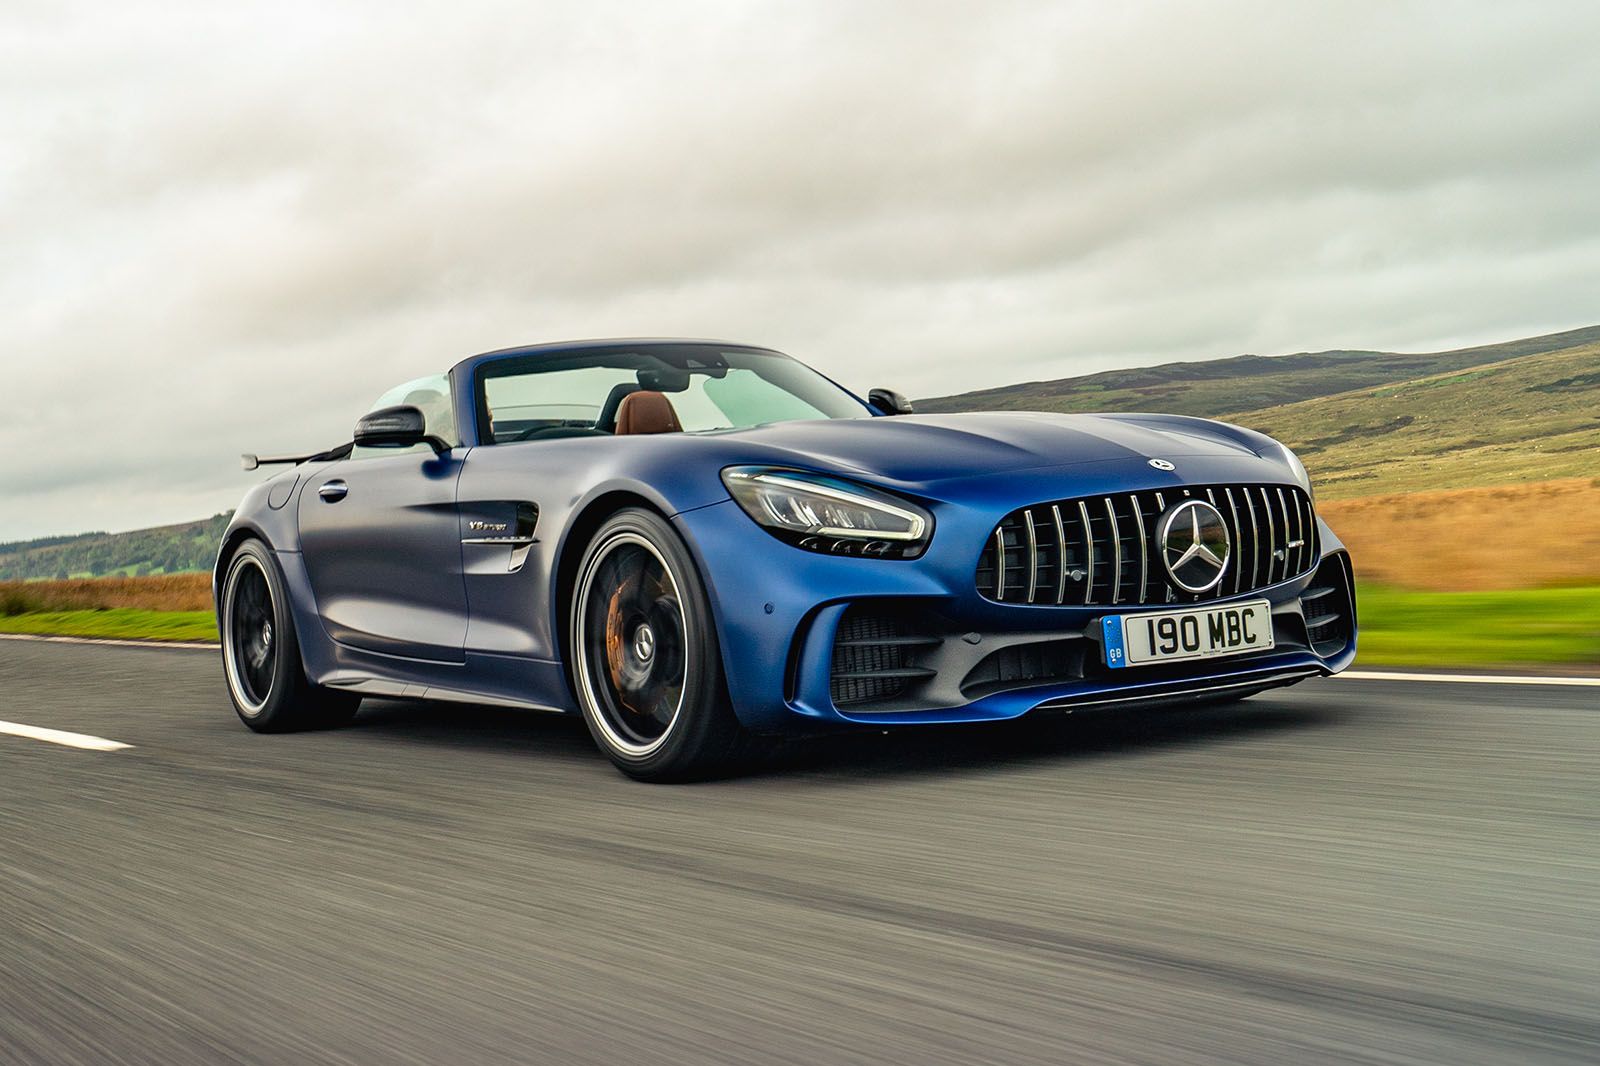 Designo Brilliant Blue Mercedes-AMG GT speeding on the country road